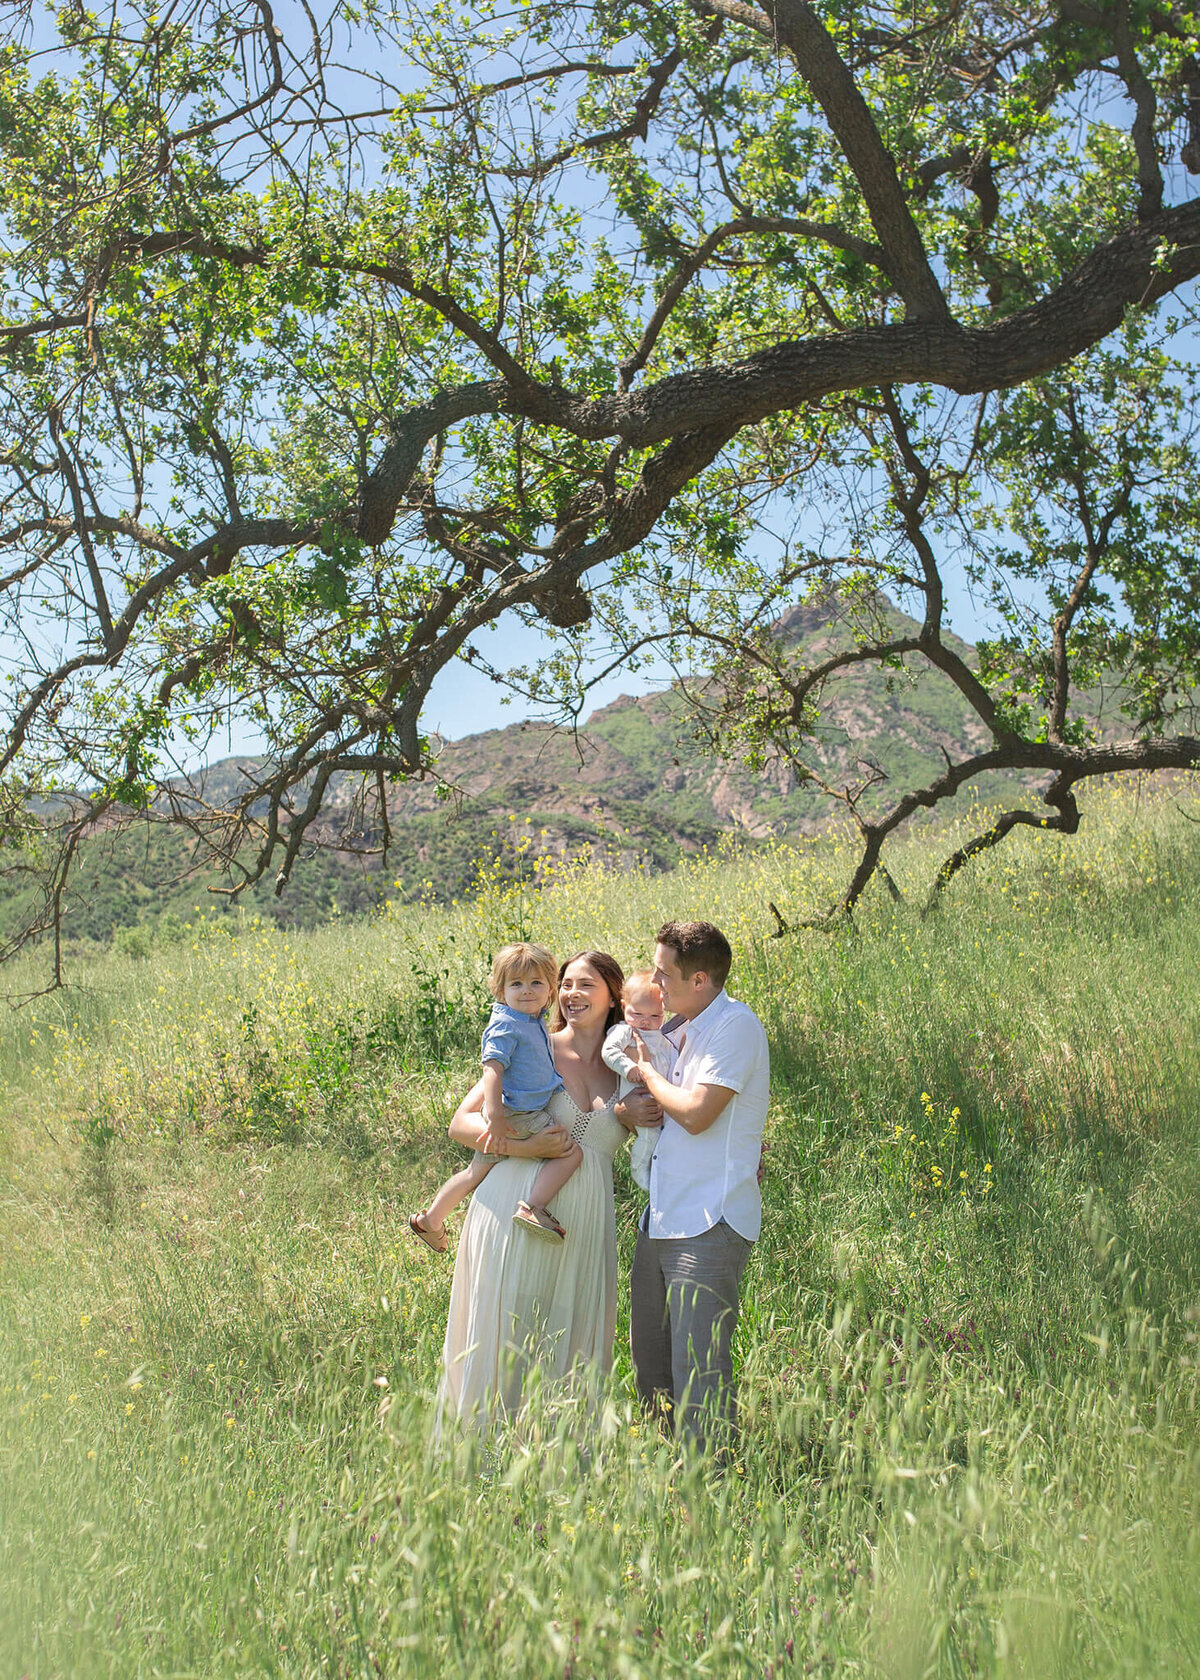 Family of 4 photographed under a tree at Malibu Creek Park